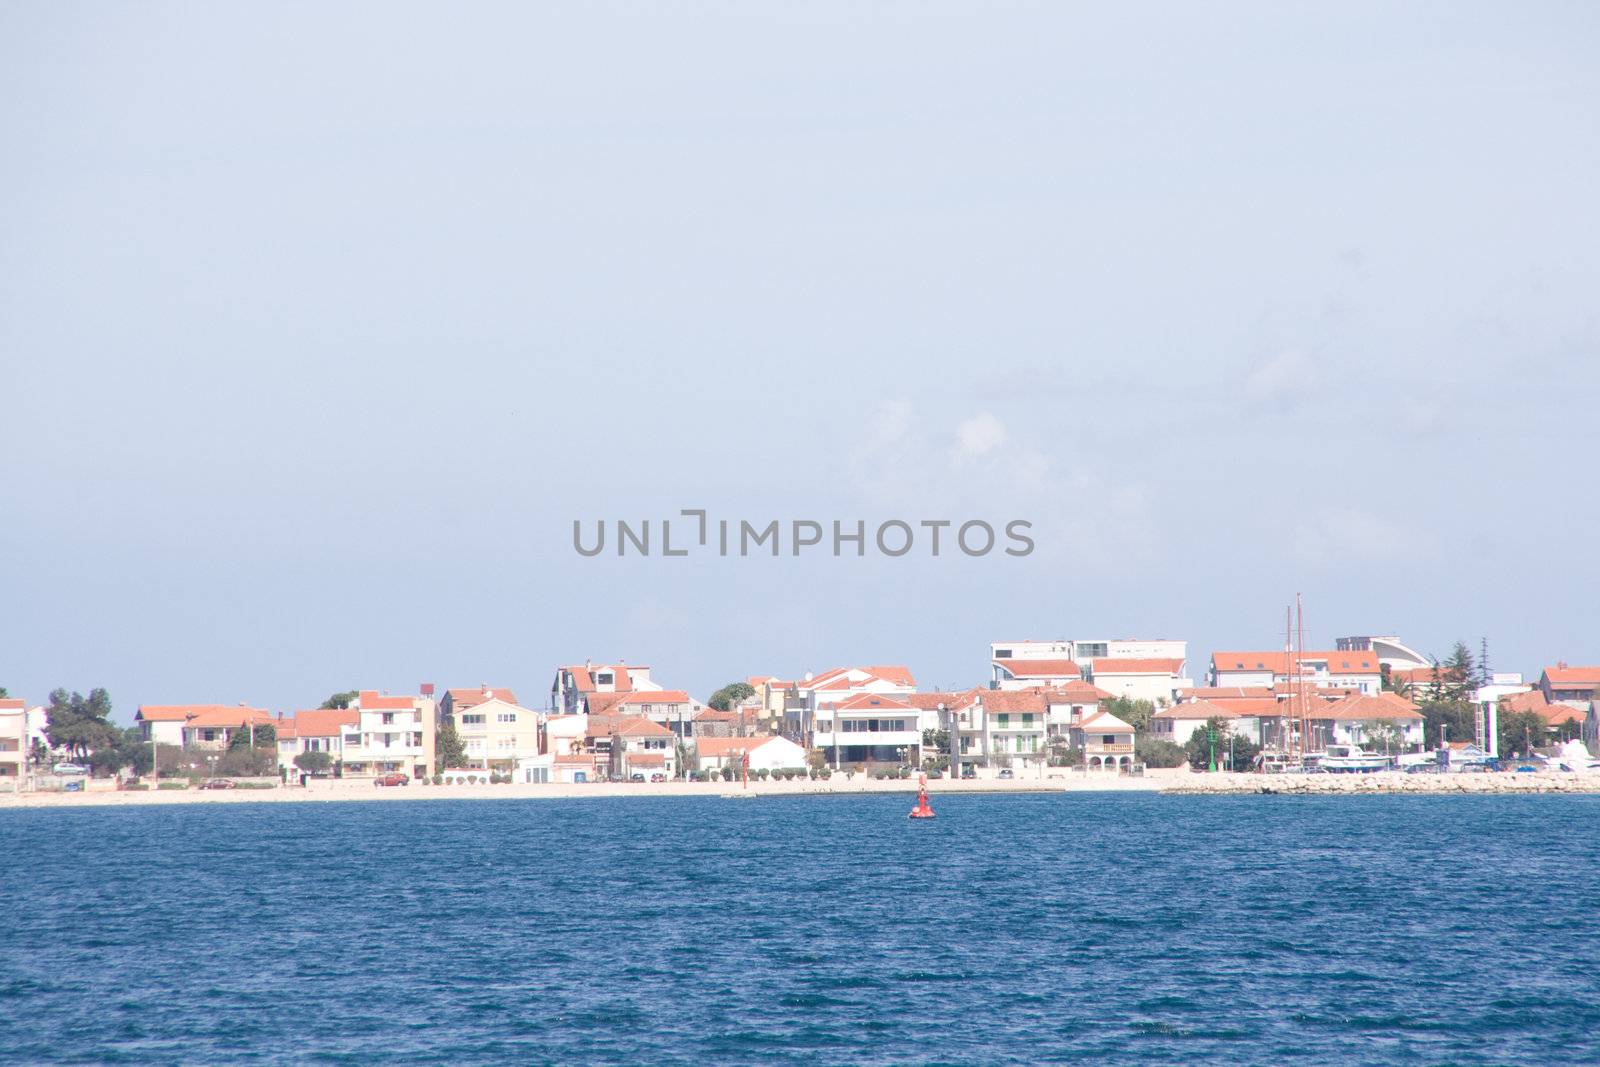 Tisno a city on the island of Murter